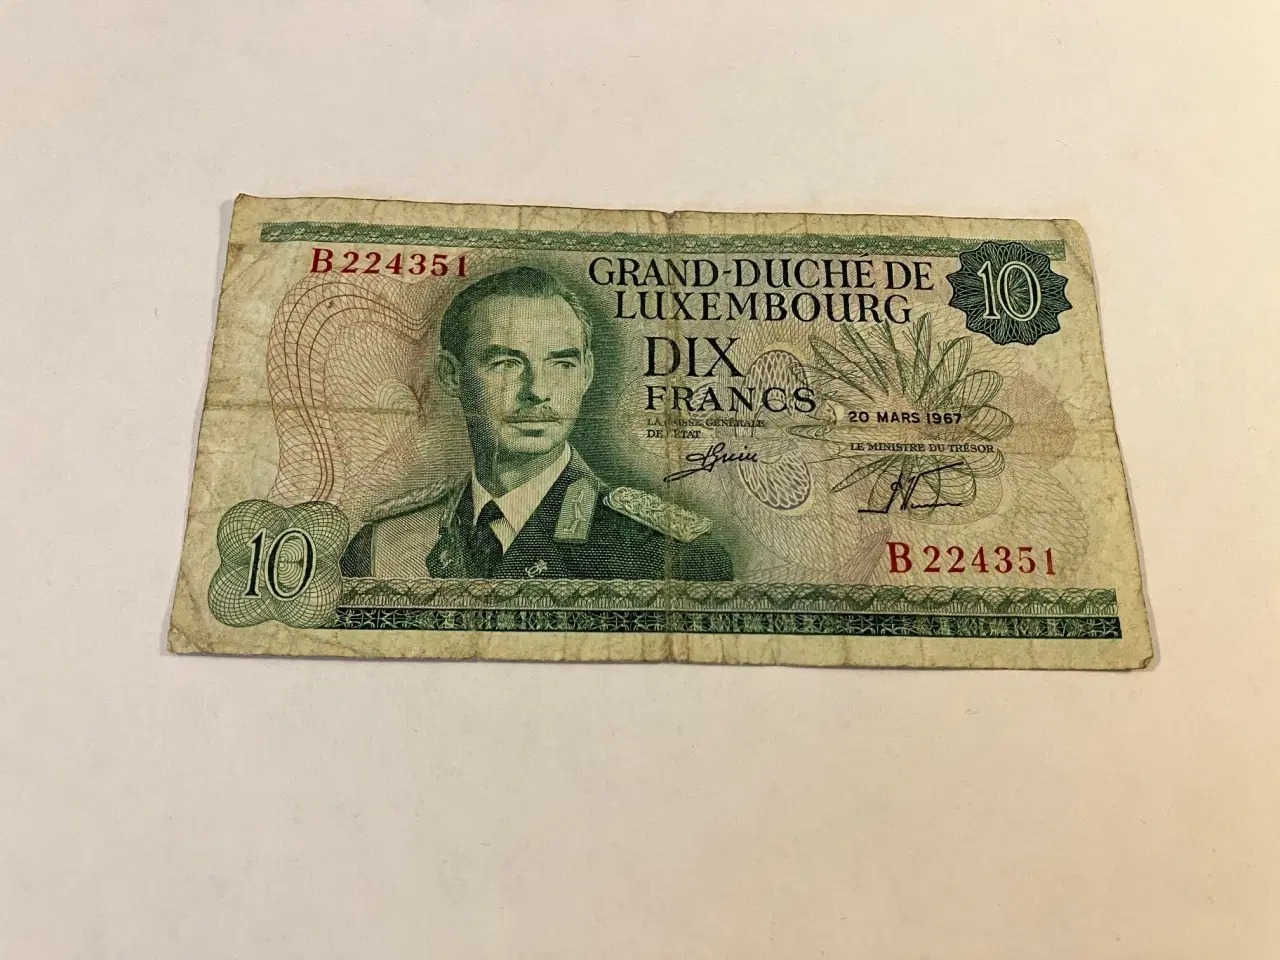 Billede 1 - 10 Francs Luxembourg 1967